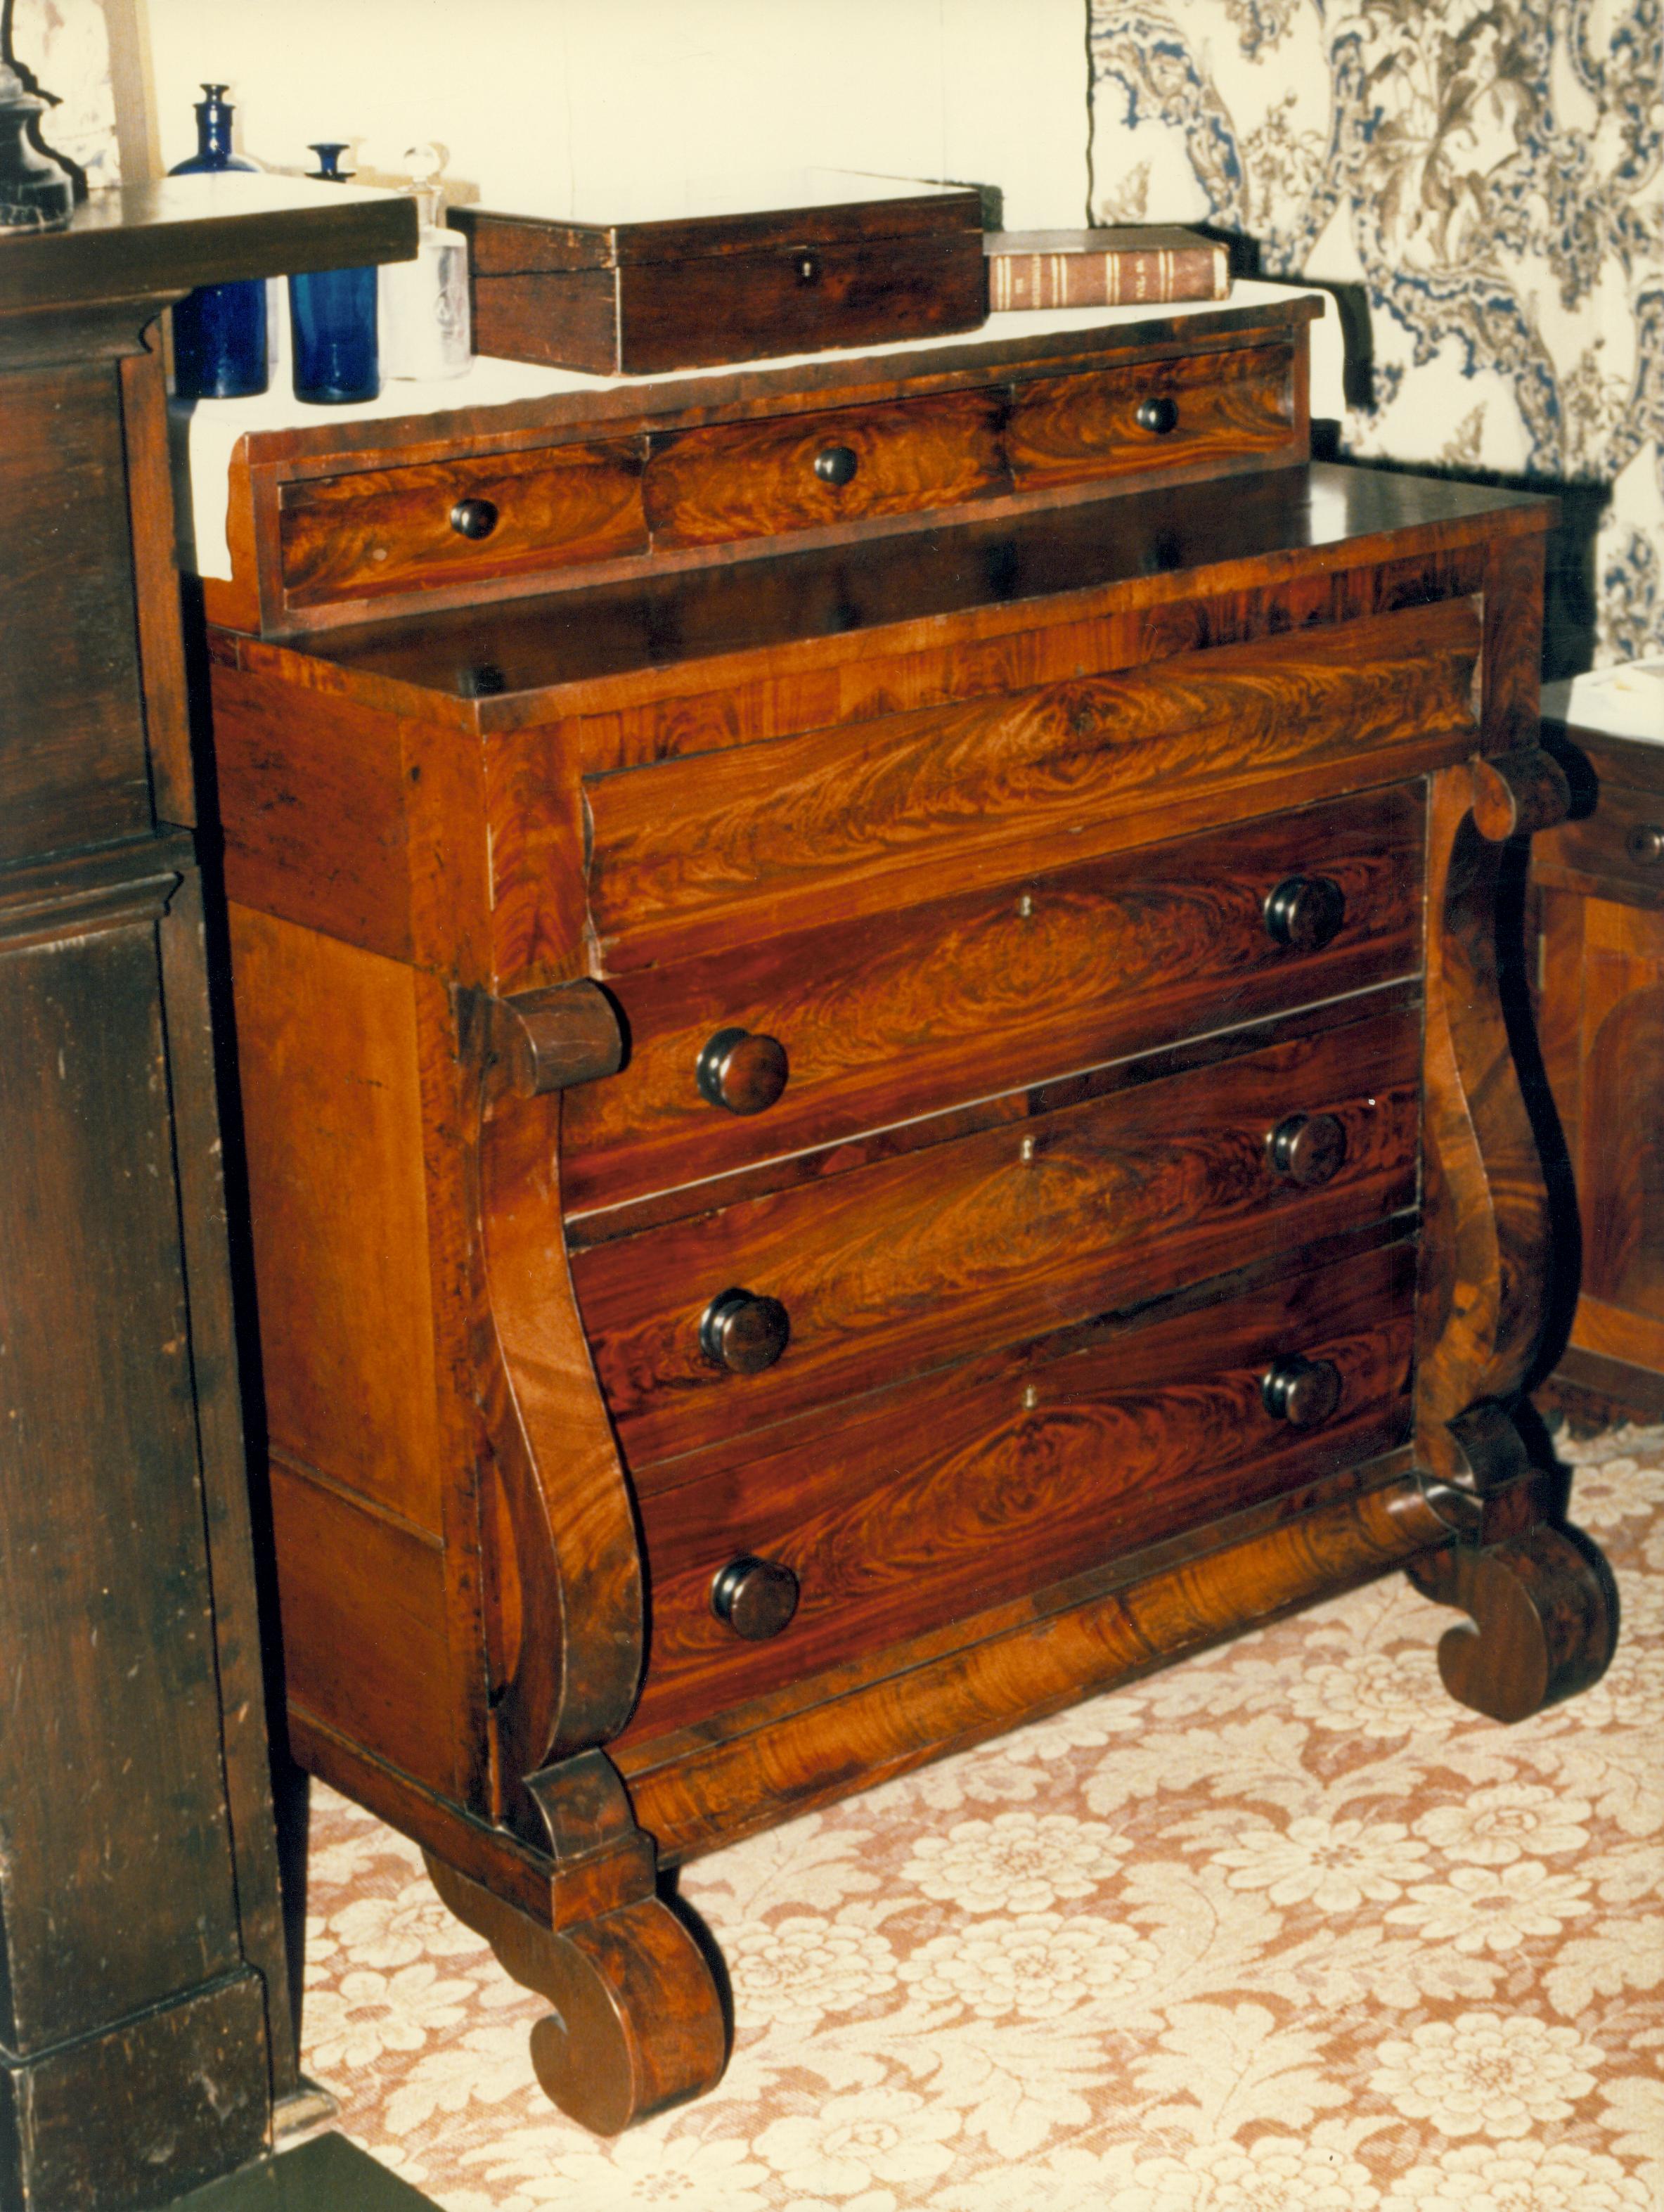 NA Lincoln, Home, Mrs., Mary, bedroom, dresser, chest, drawers